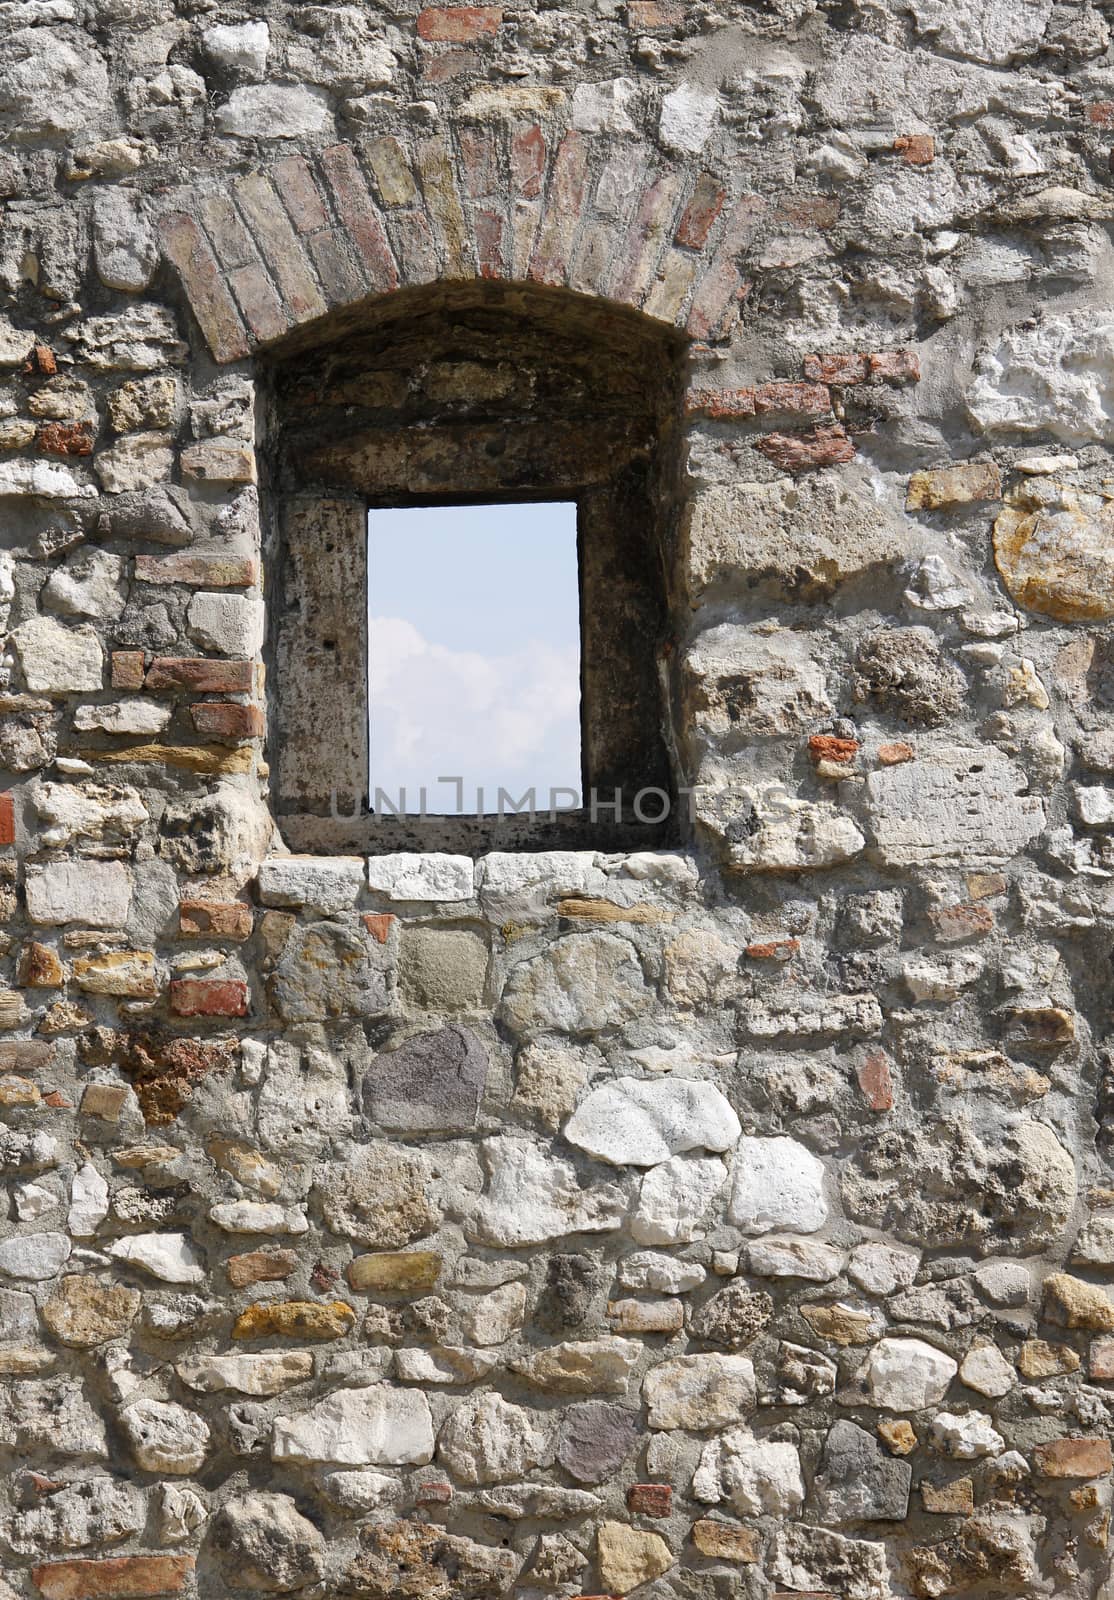 The medieval castle fortress stone wall window.